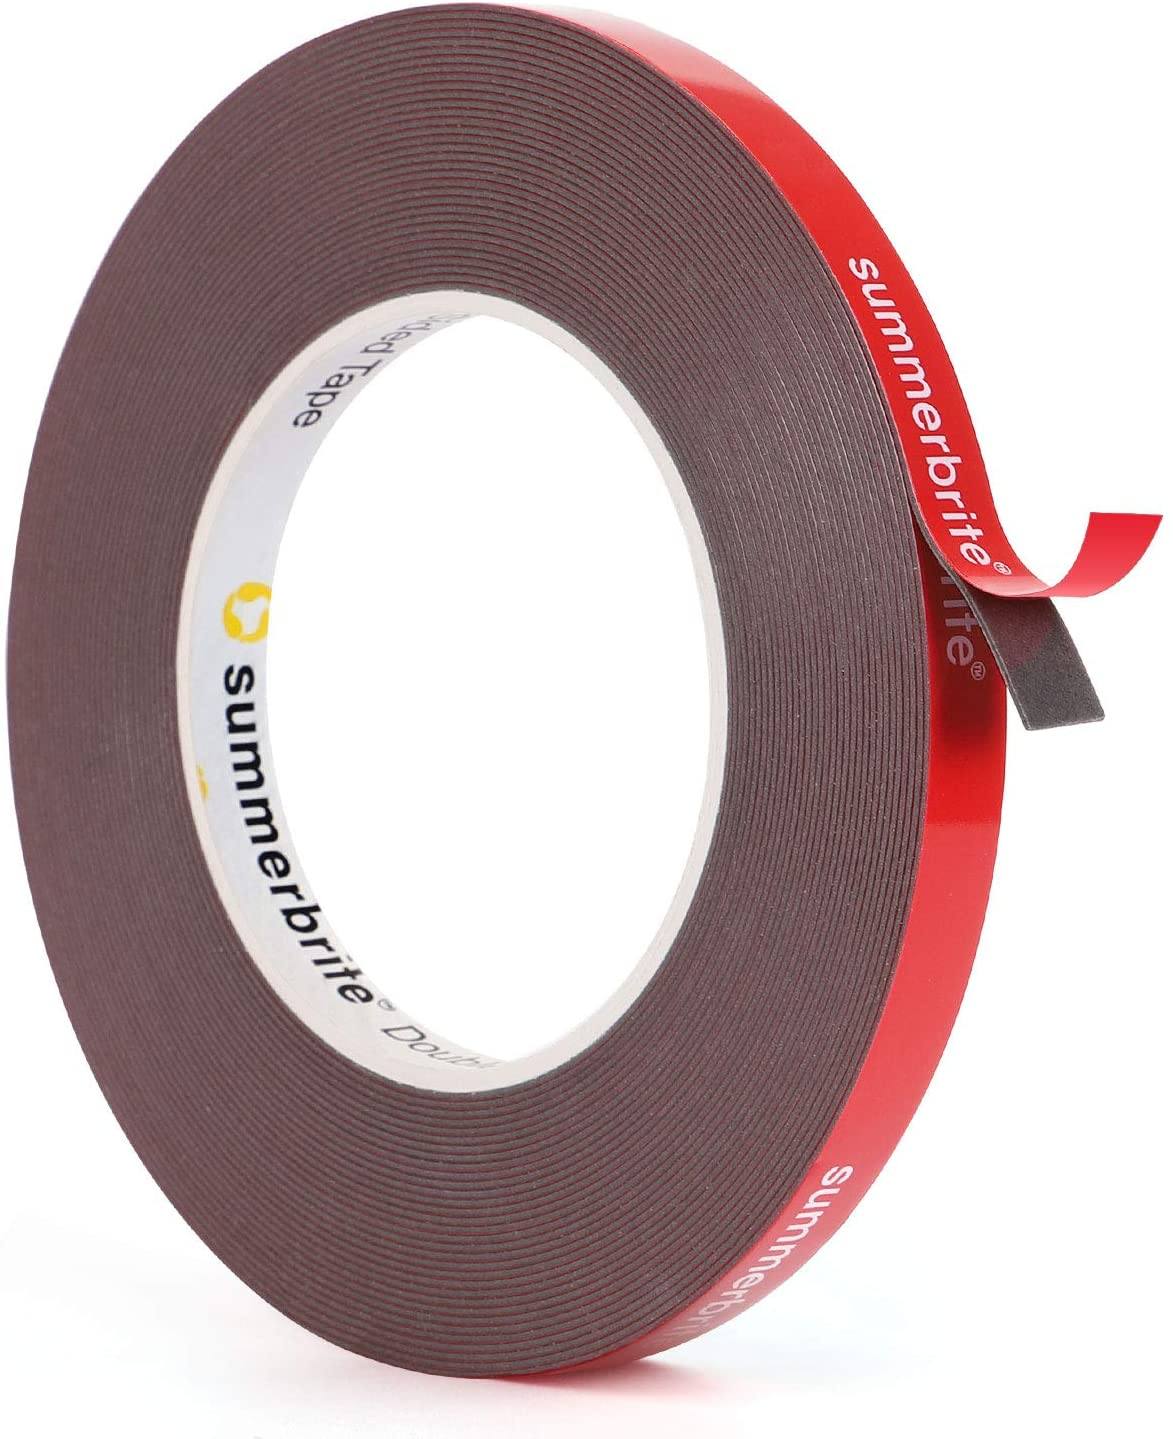 Double Side Adhesive Foam Tape Round